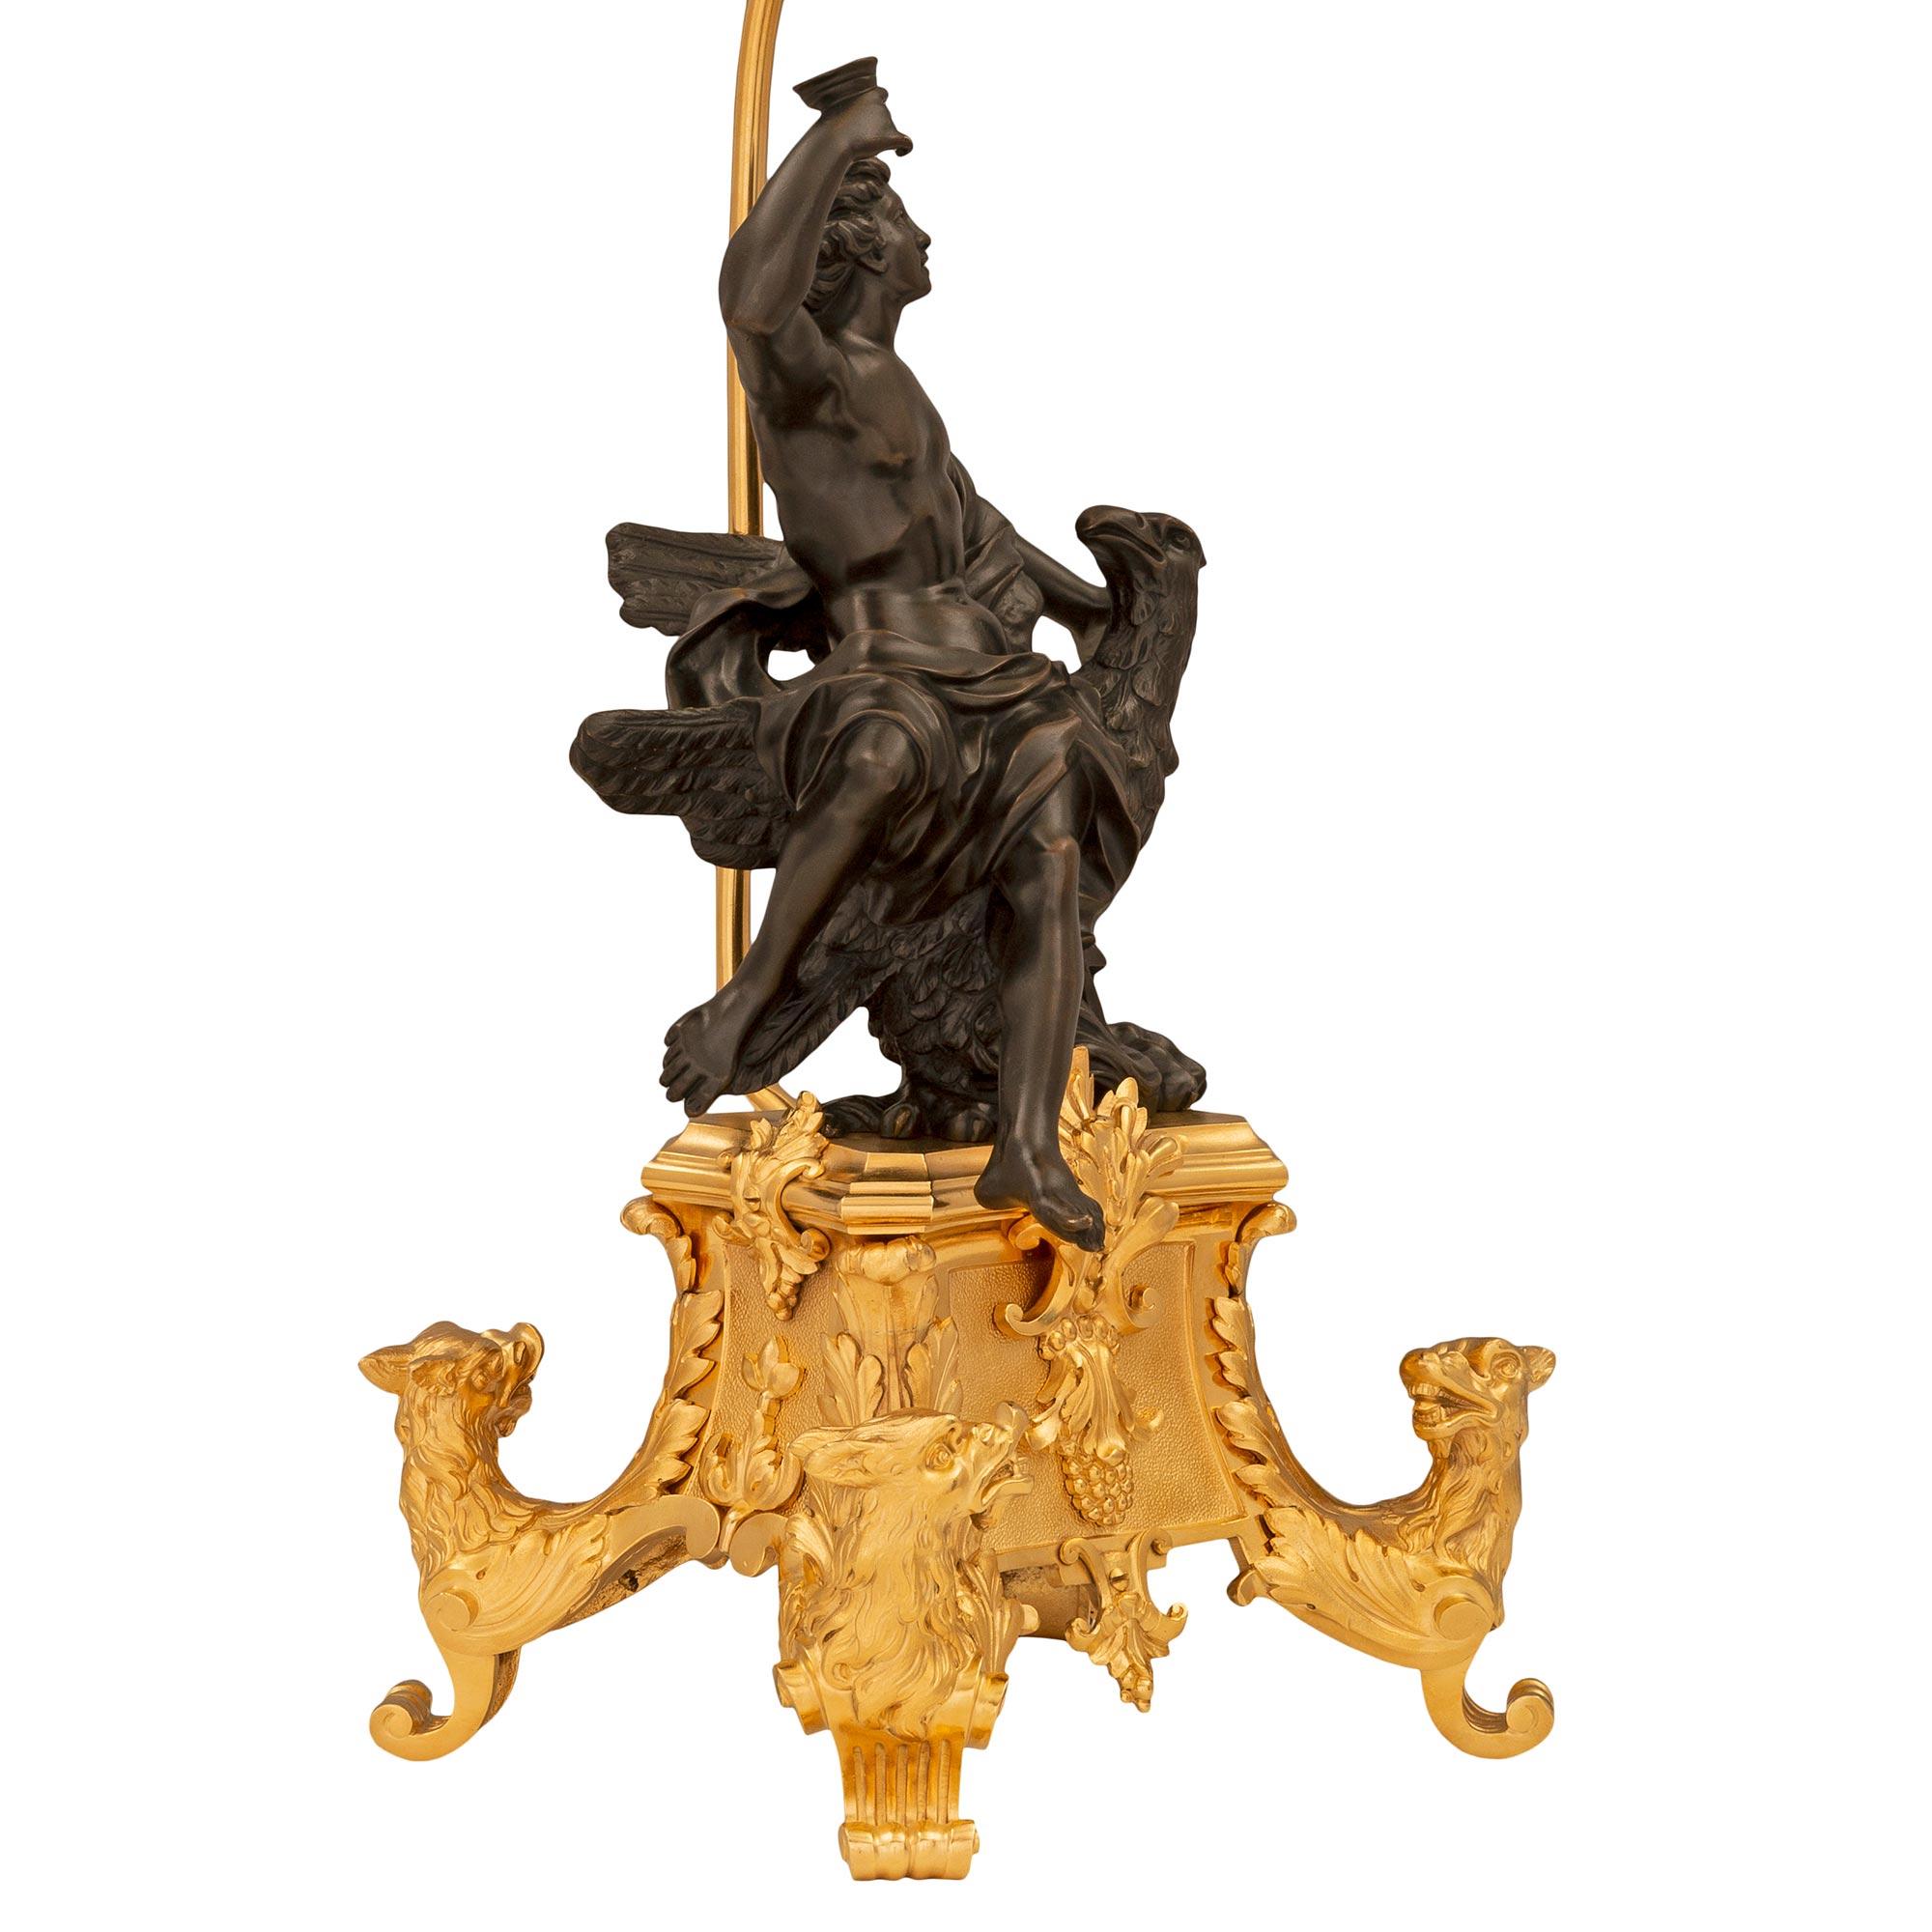 A striking and very high quality true pair of French 19th century Louis XIV st. ormolu and patinated bronze lamps. Each lamp is raised by an exceptional and most decorative curved ormolu base with superb central foliate and berried reserves and